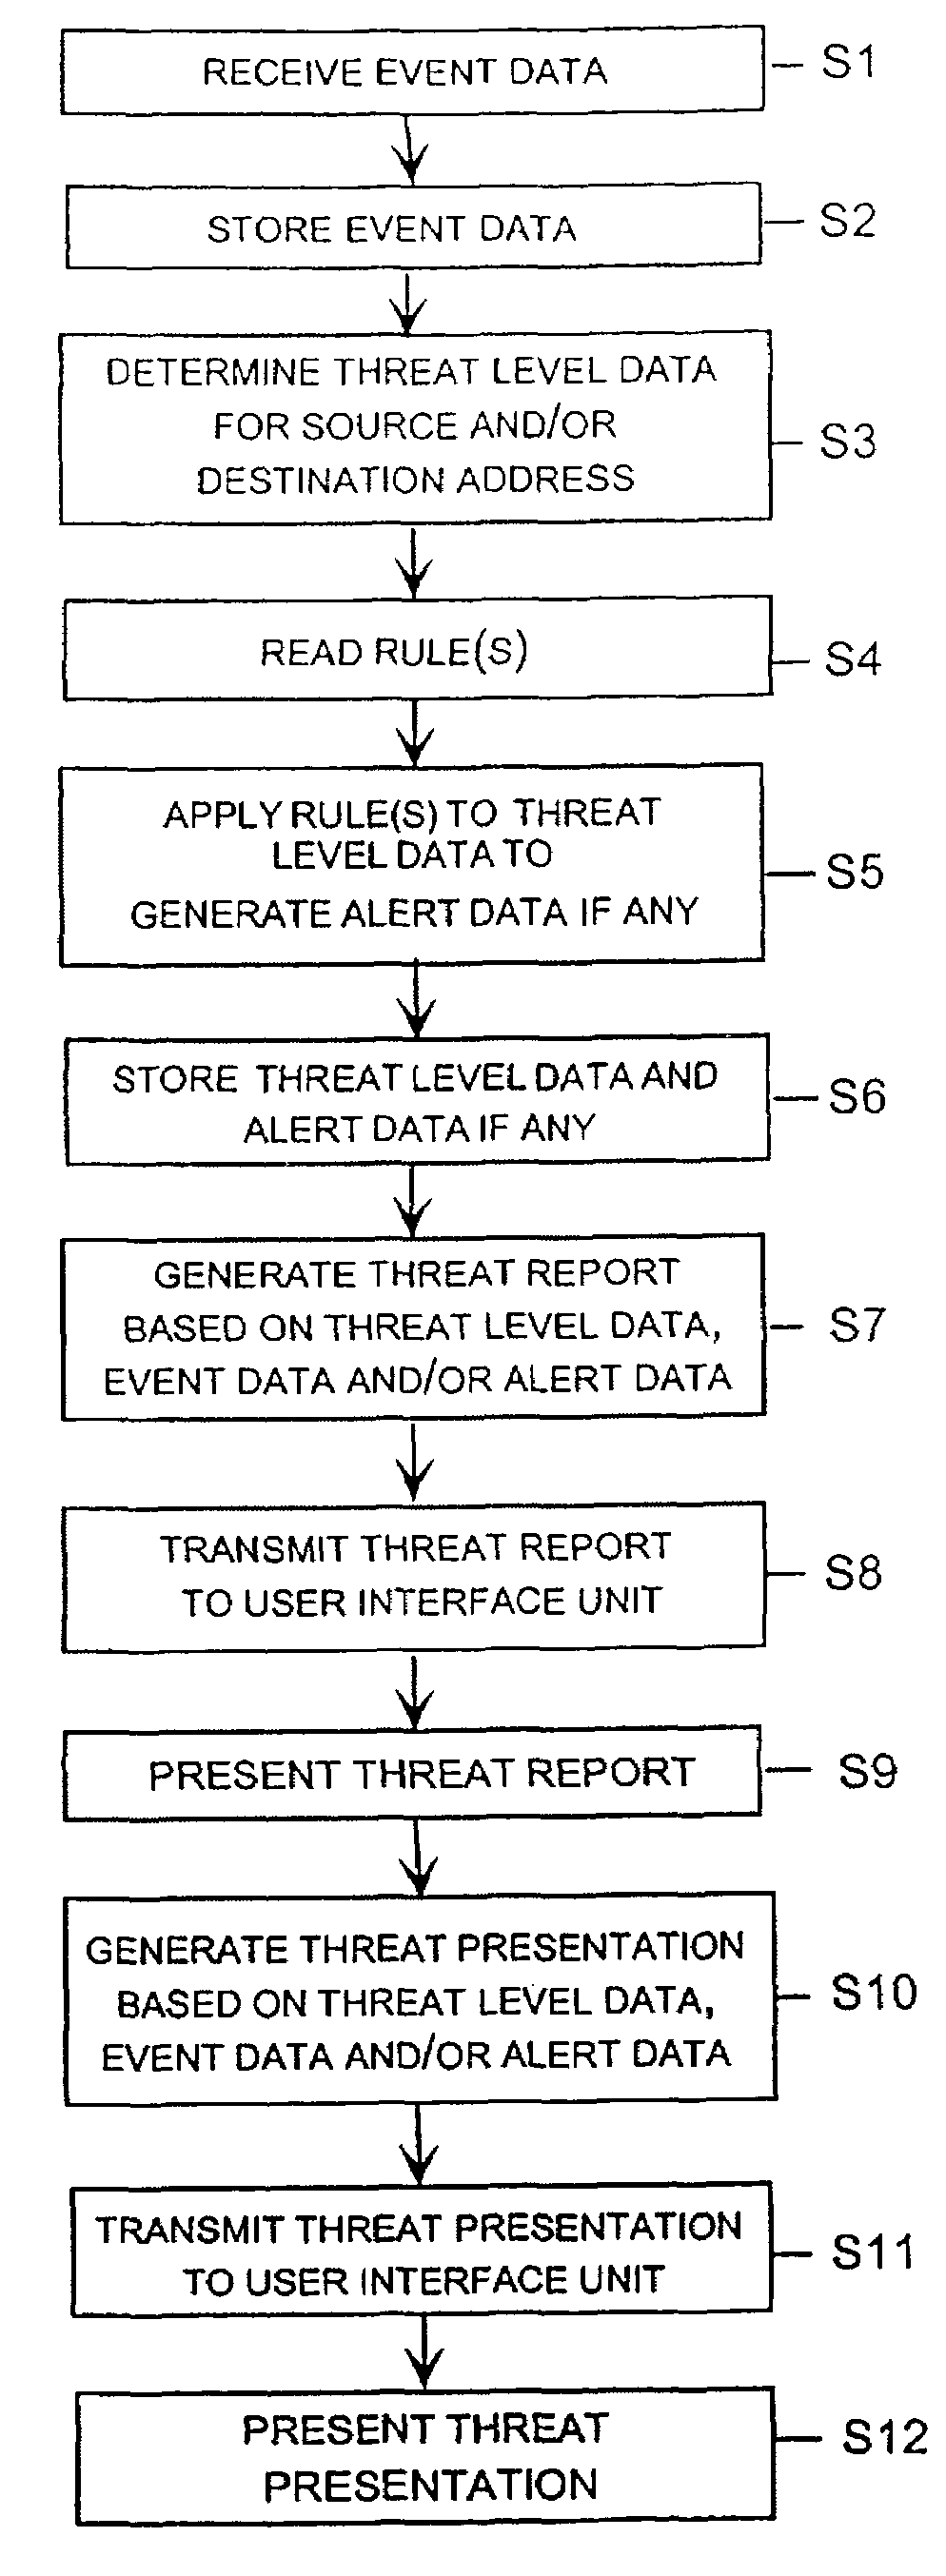 Determining threat level associated with network activity